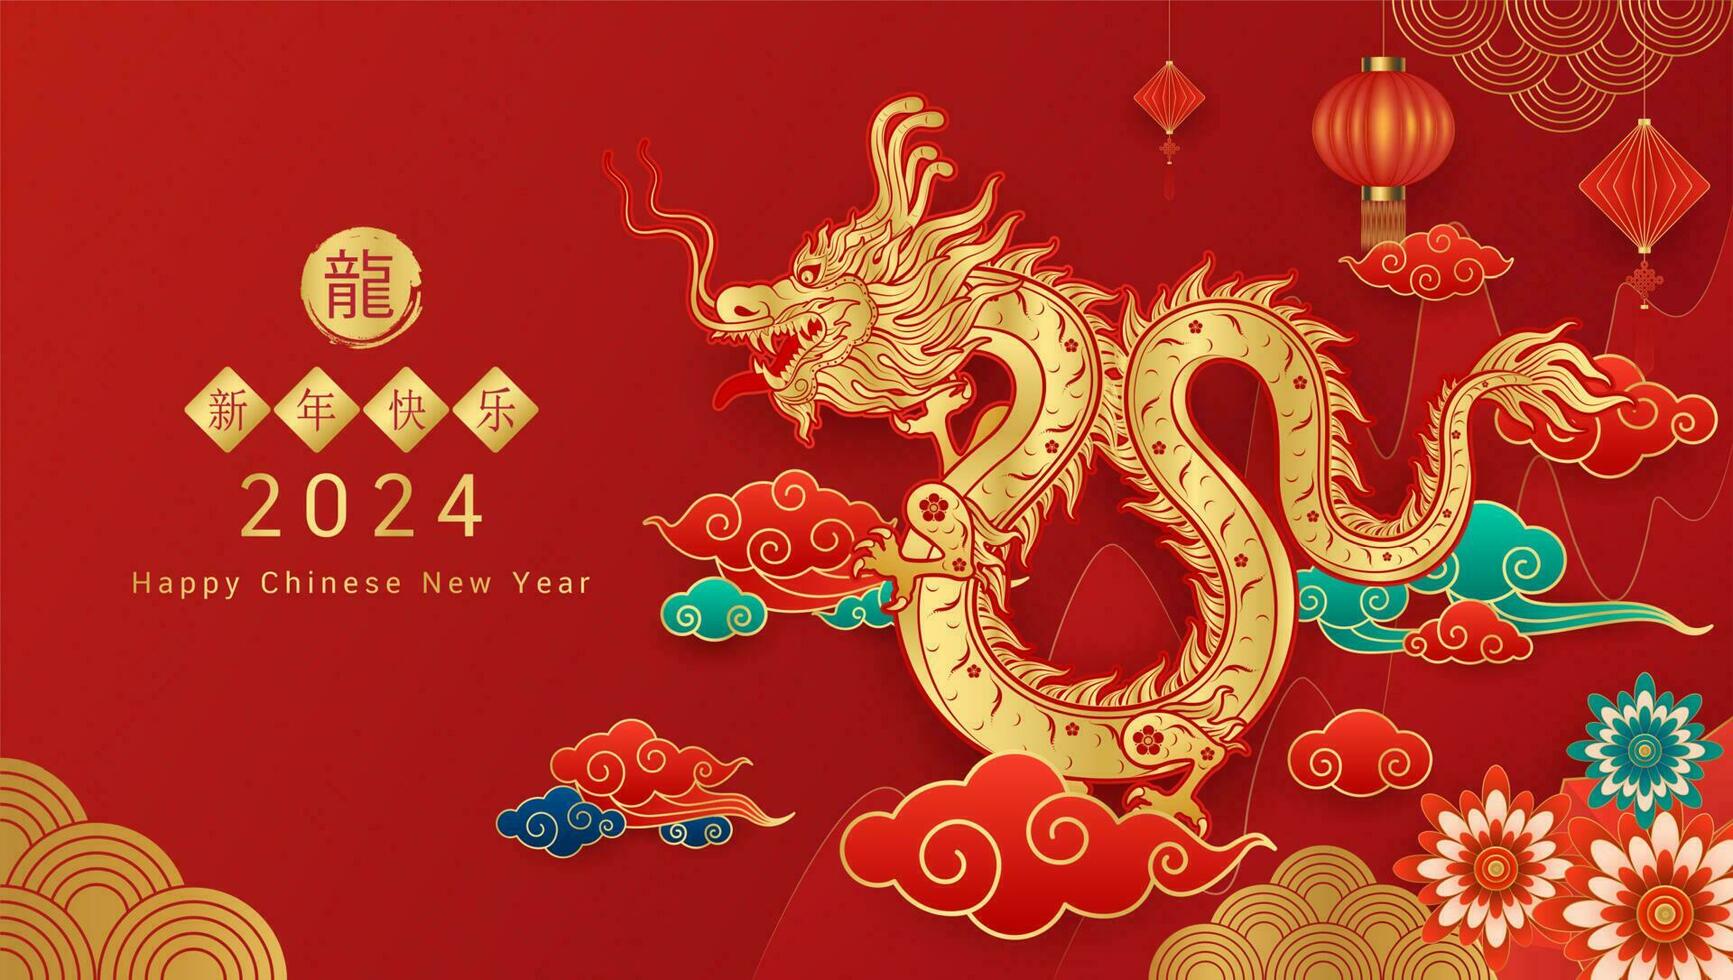 happy-chinese-new-year-2024-chinese-dragon-gold-zodiac-sign-on-red-background-for-card-design